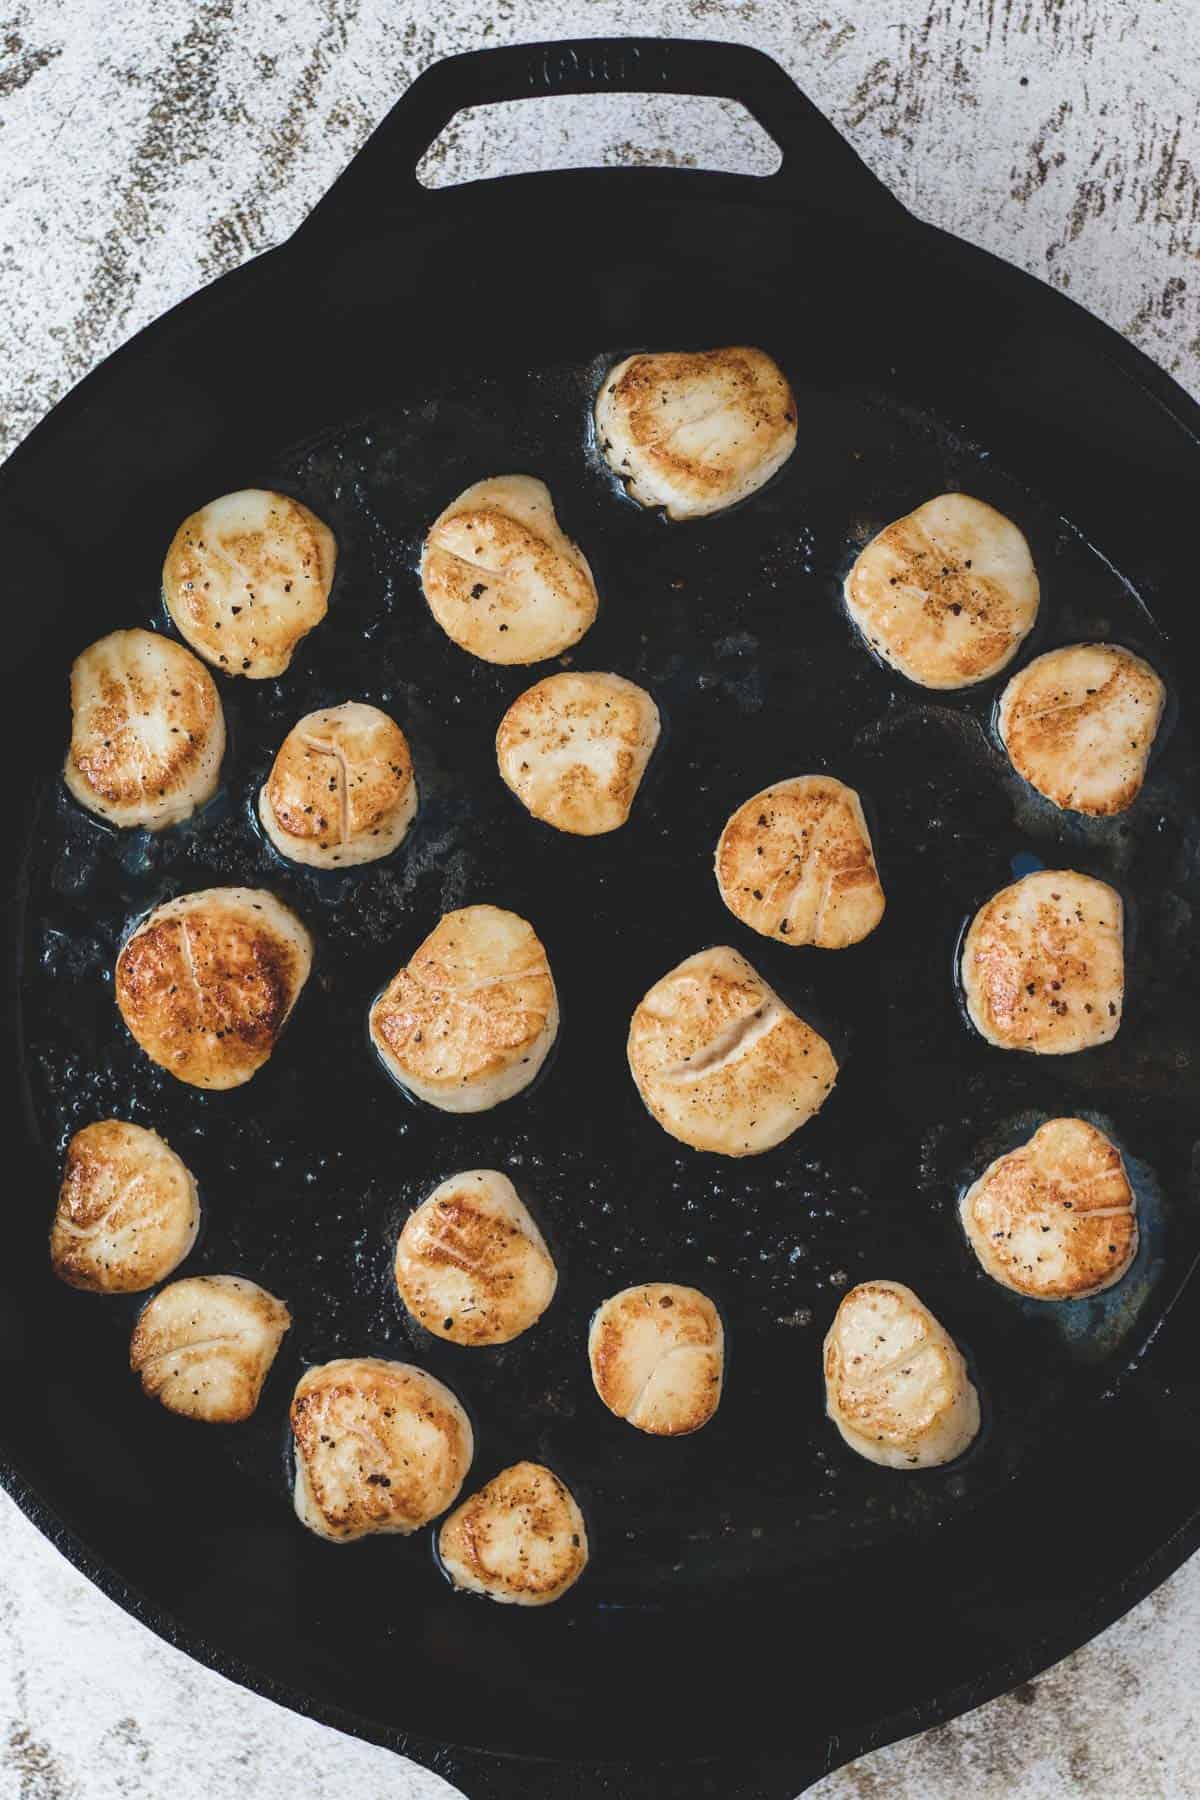 Searing scallops in a cast-iron pan.